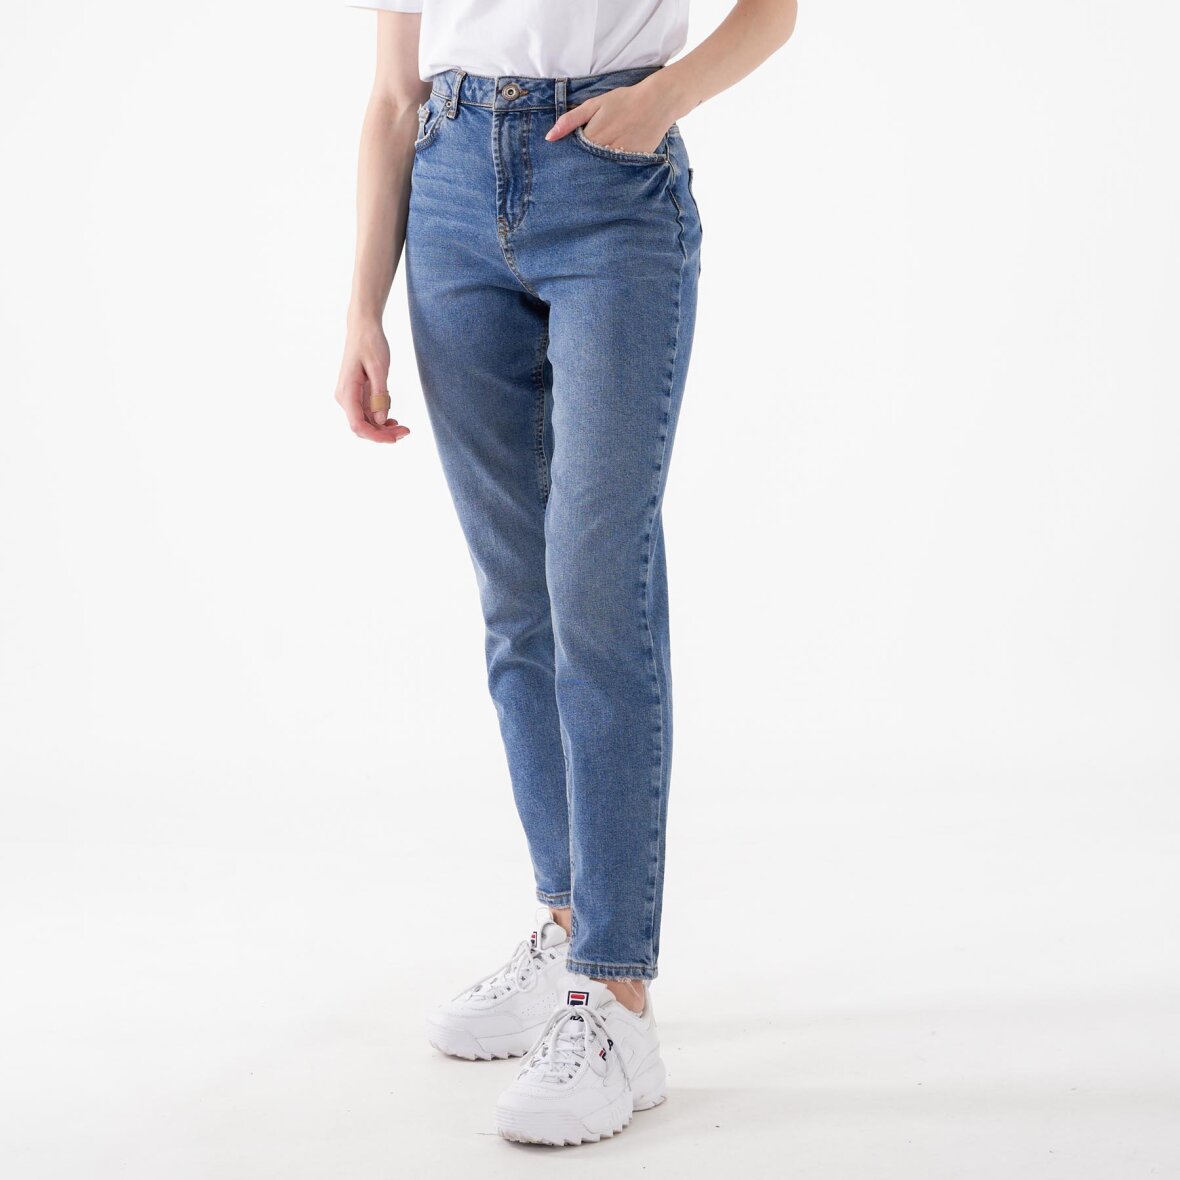 Pieces - Pcleah mom hw jeans